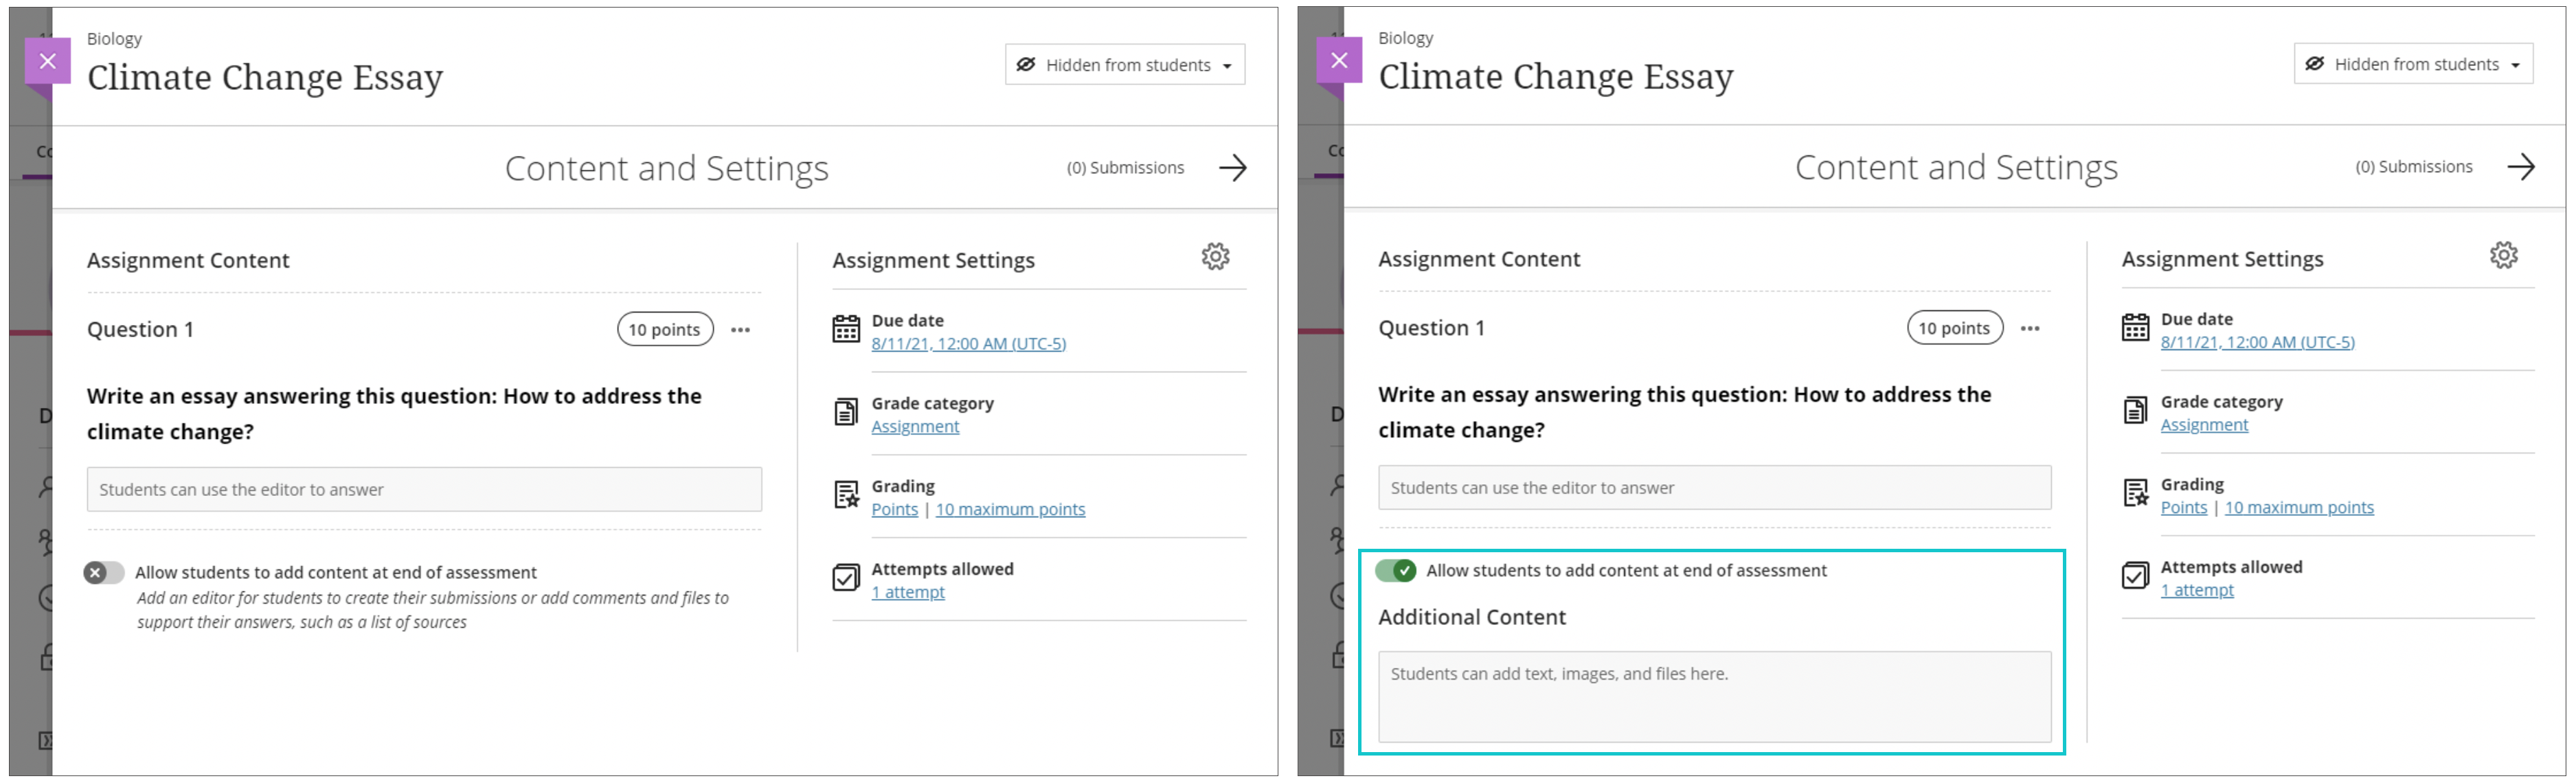 click the "Allow students to add content at end of assessment" toggle to enable a field where students can add text, images, or files at the end of an assessment as additional evidence